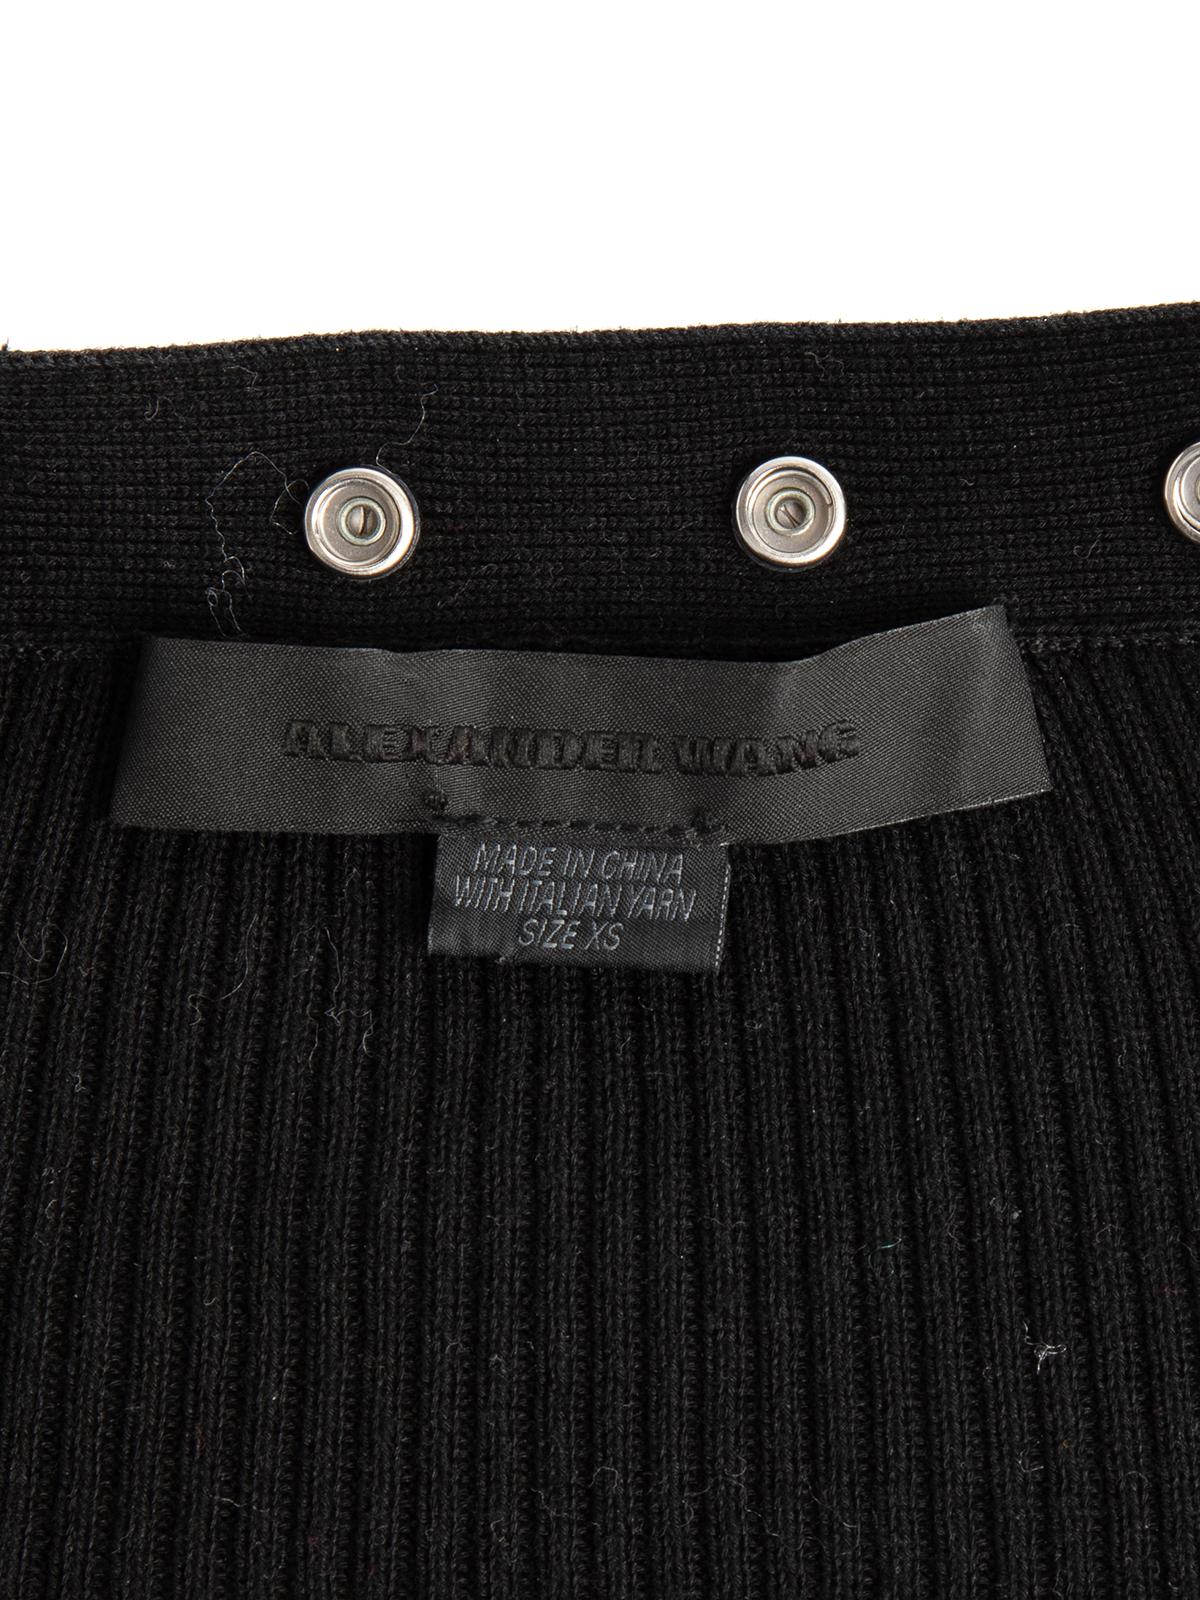 Black Pre-Loved Alexander Wang Women's Knit Top with Button Detail